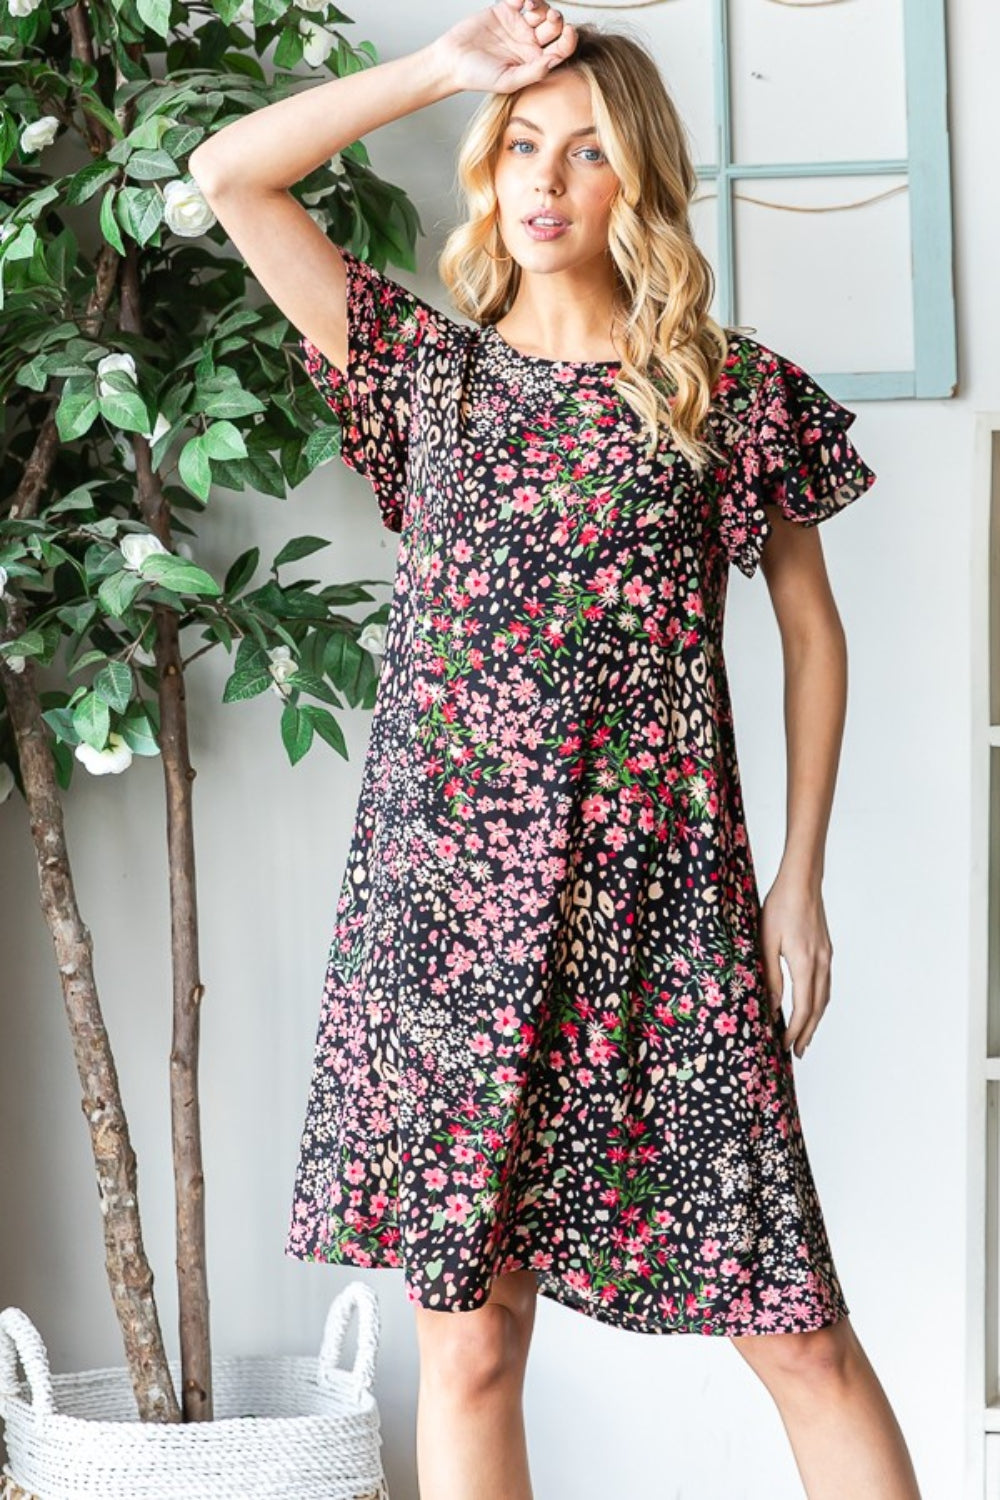 Get ready to turn heads in this stunning Printed Ruffled Short Sleeve Dress. With its eye-catching print and playful ruffled sleeves, this dress exudes feminine charm. The best part? It comes with pockets, adding a practical touch to this stylish piece. S - 3X